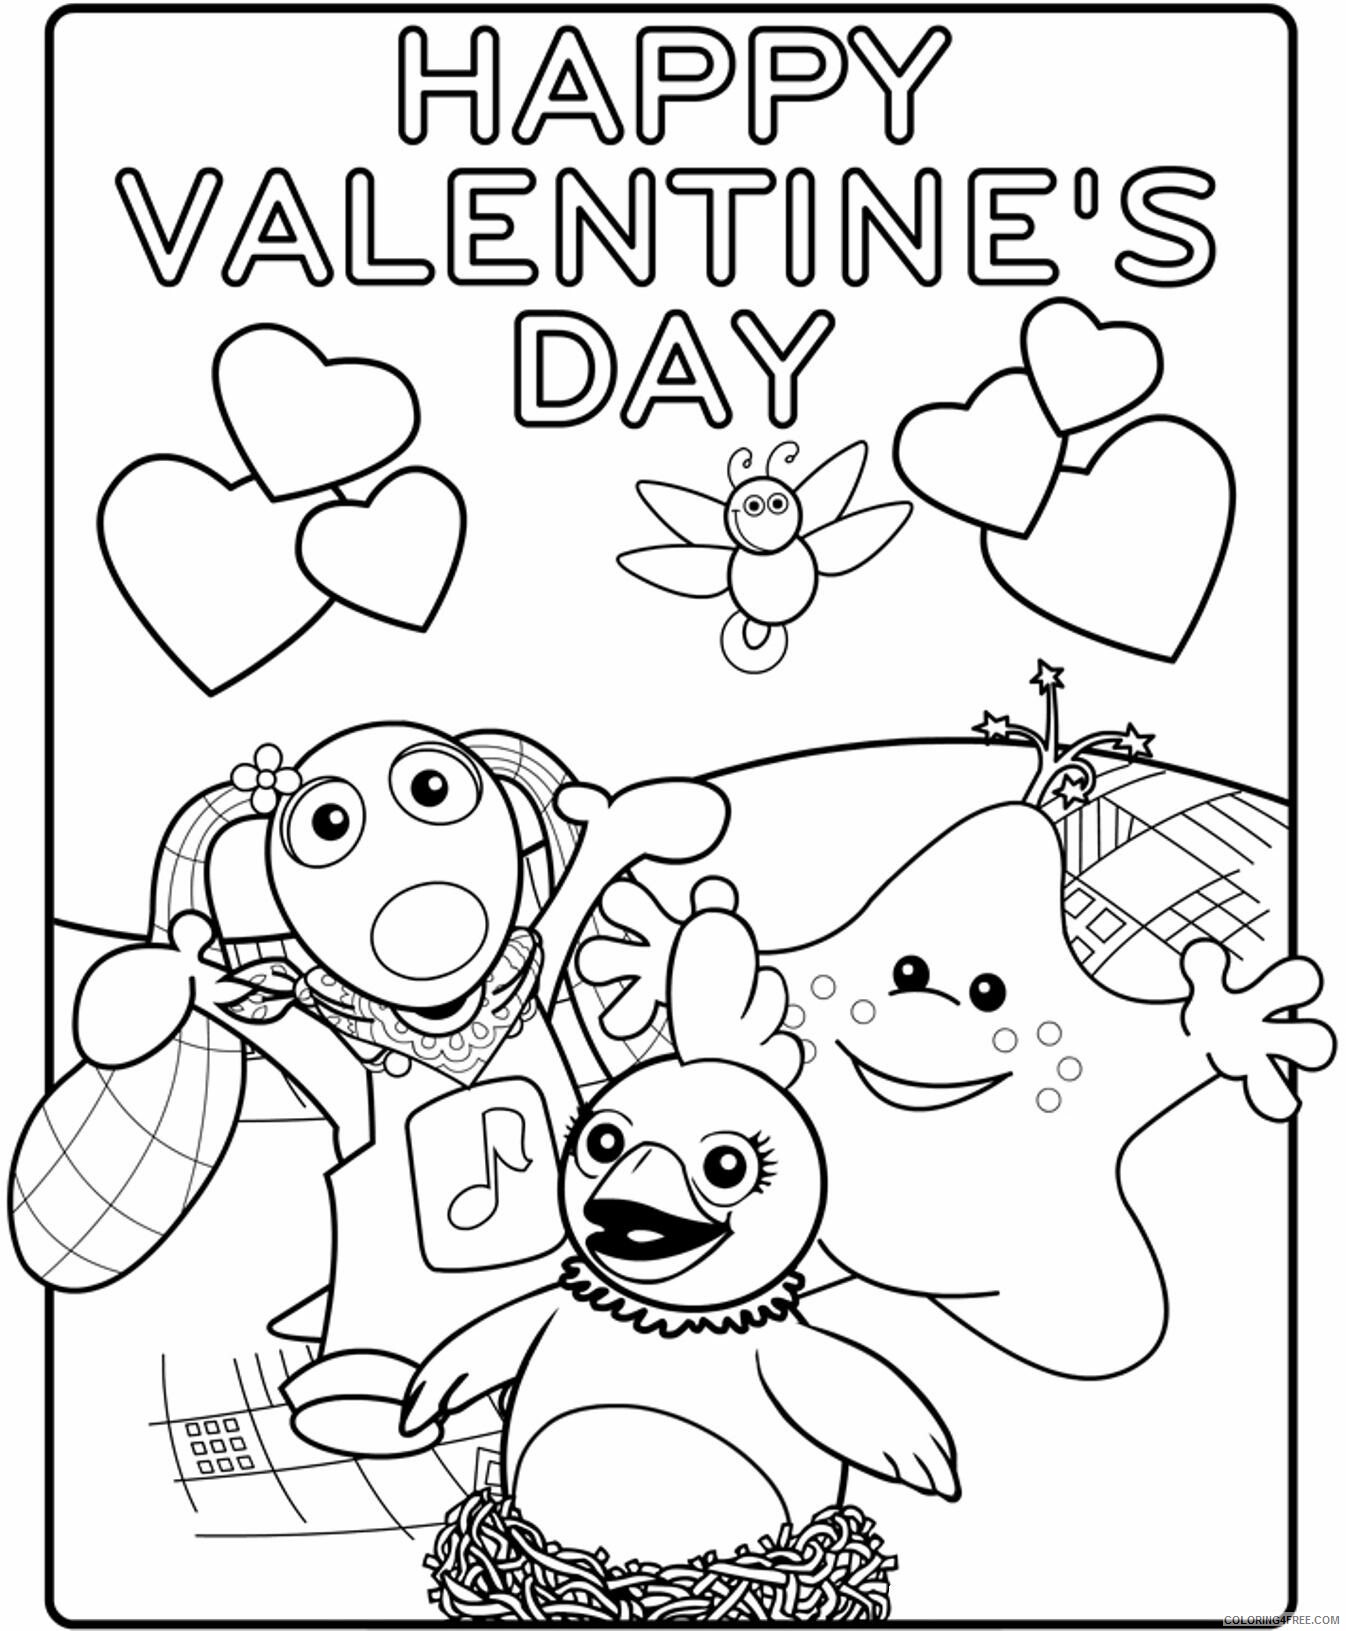 Valentines Day Coloring Pages Holiday Happy Valentines Day Card Printable 2021 0967 Coloring4free